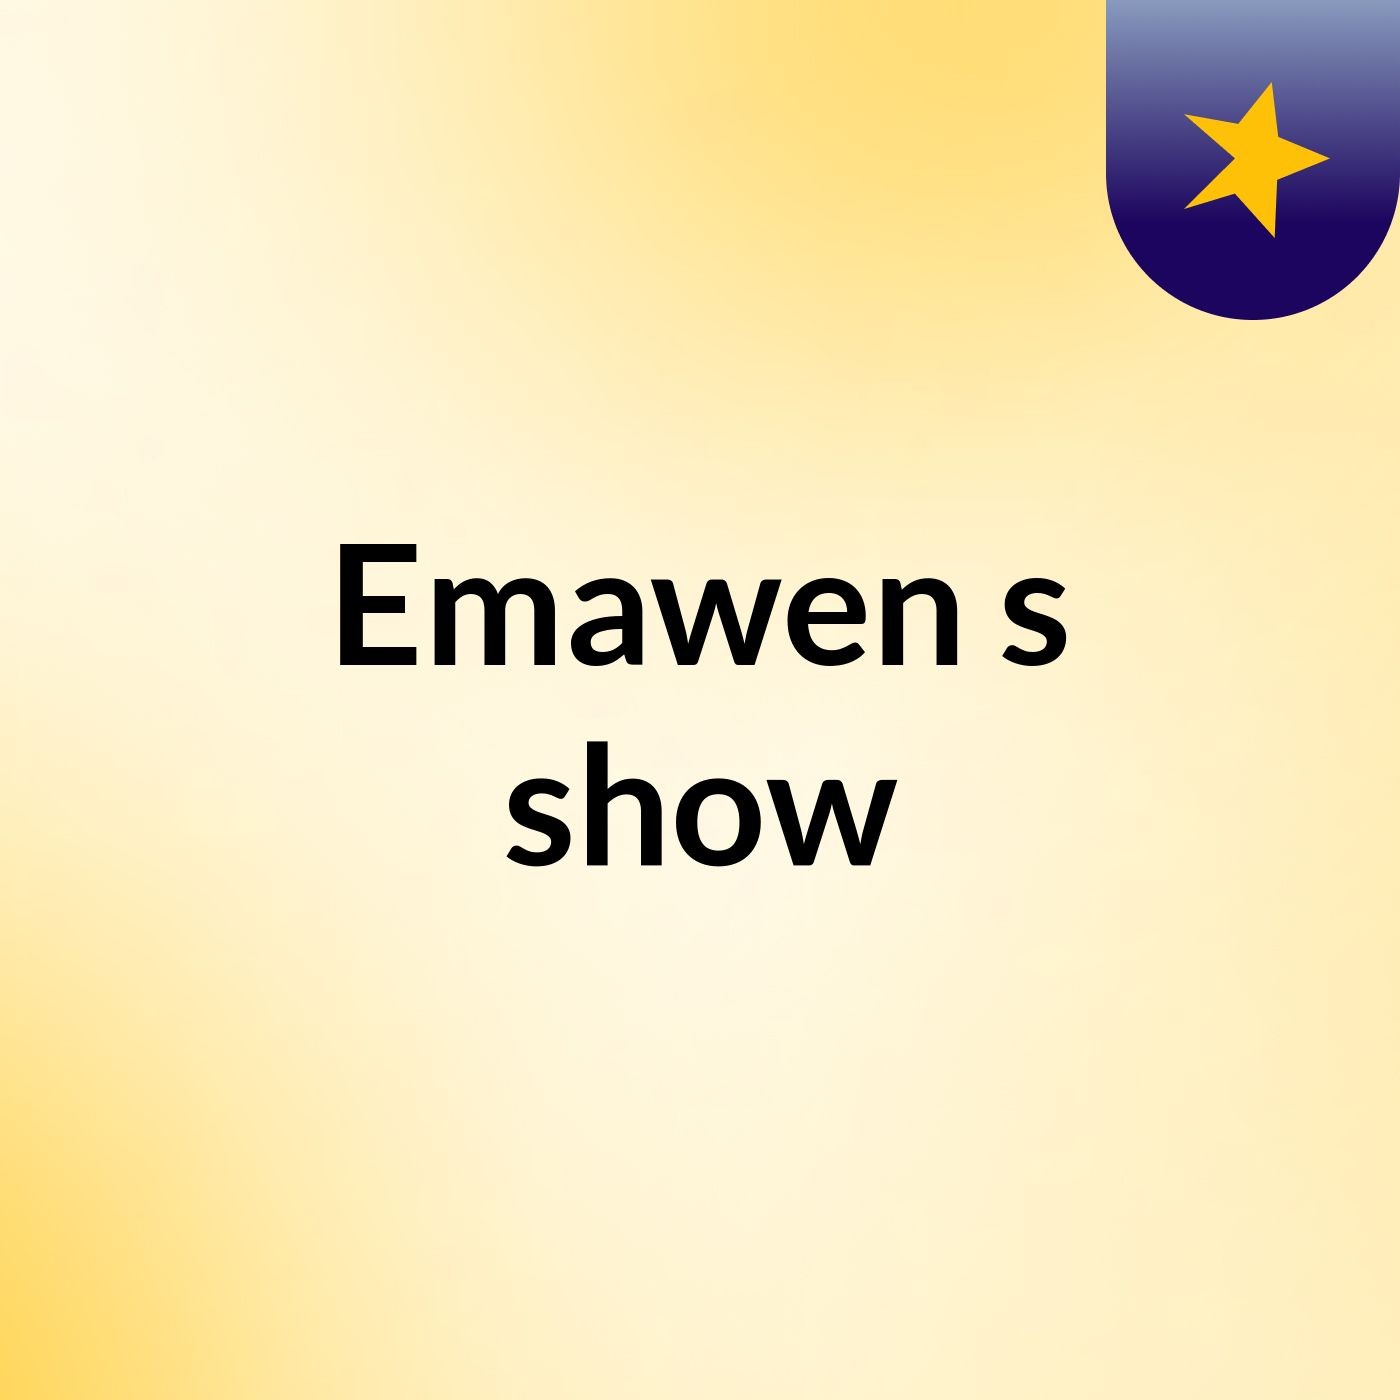 Emawen's show